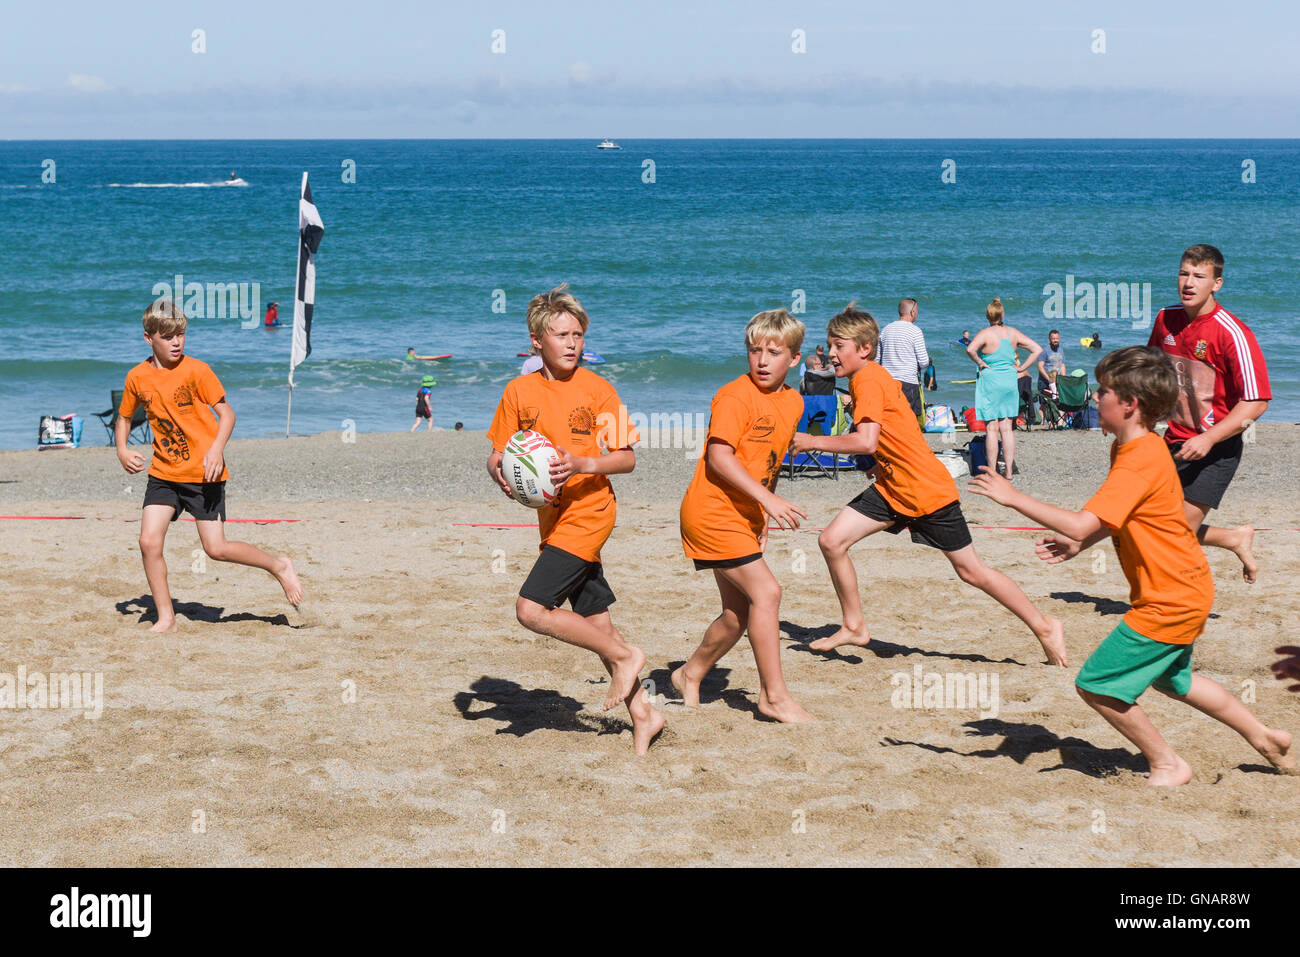 The annual Lusty Glaze Beach Tag Rugby tournament in Newquay, Cornwall. Stock Photo